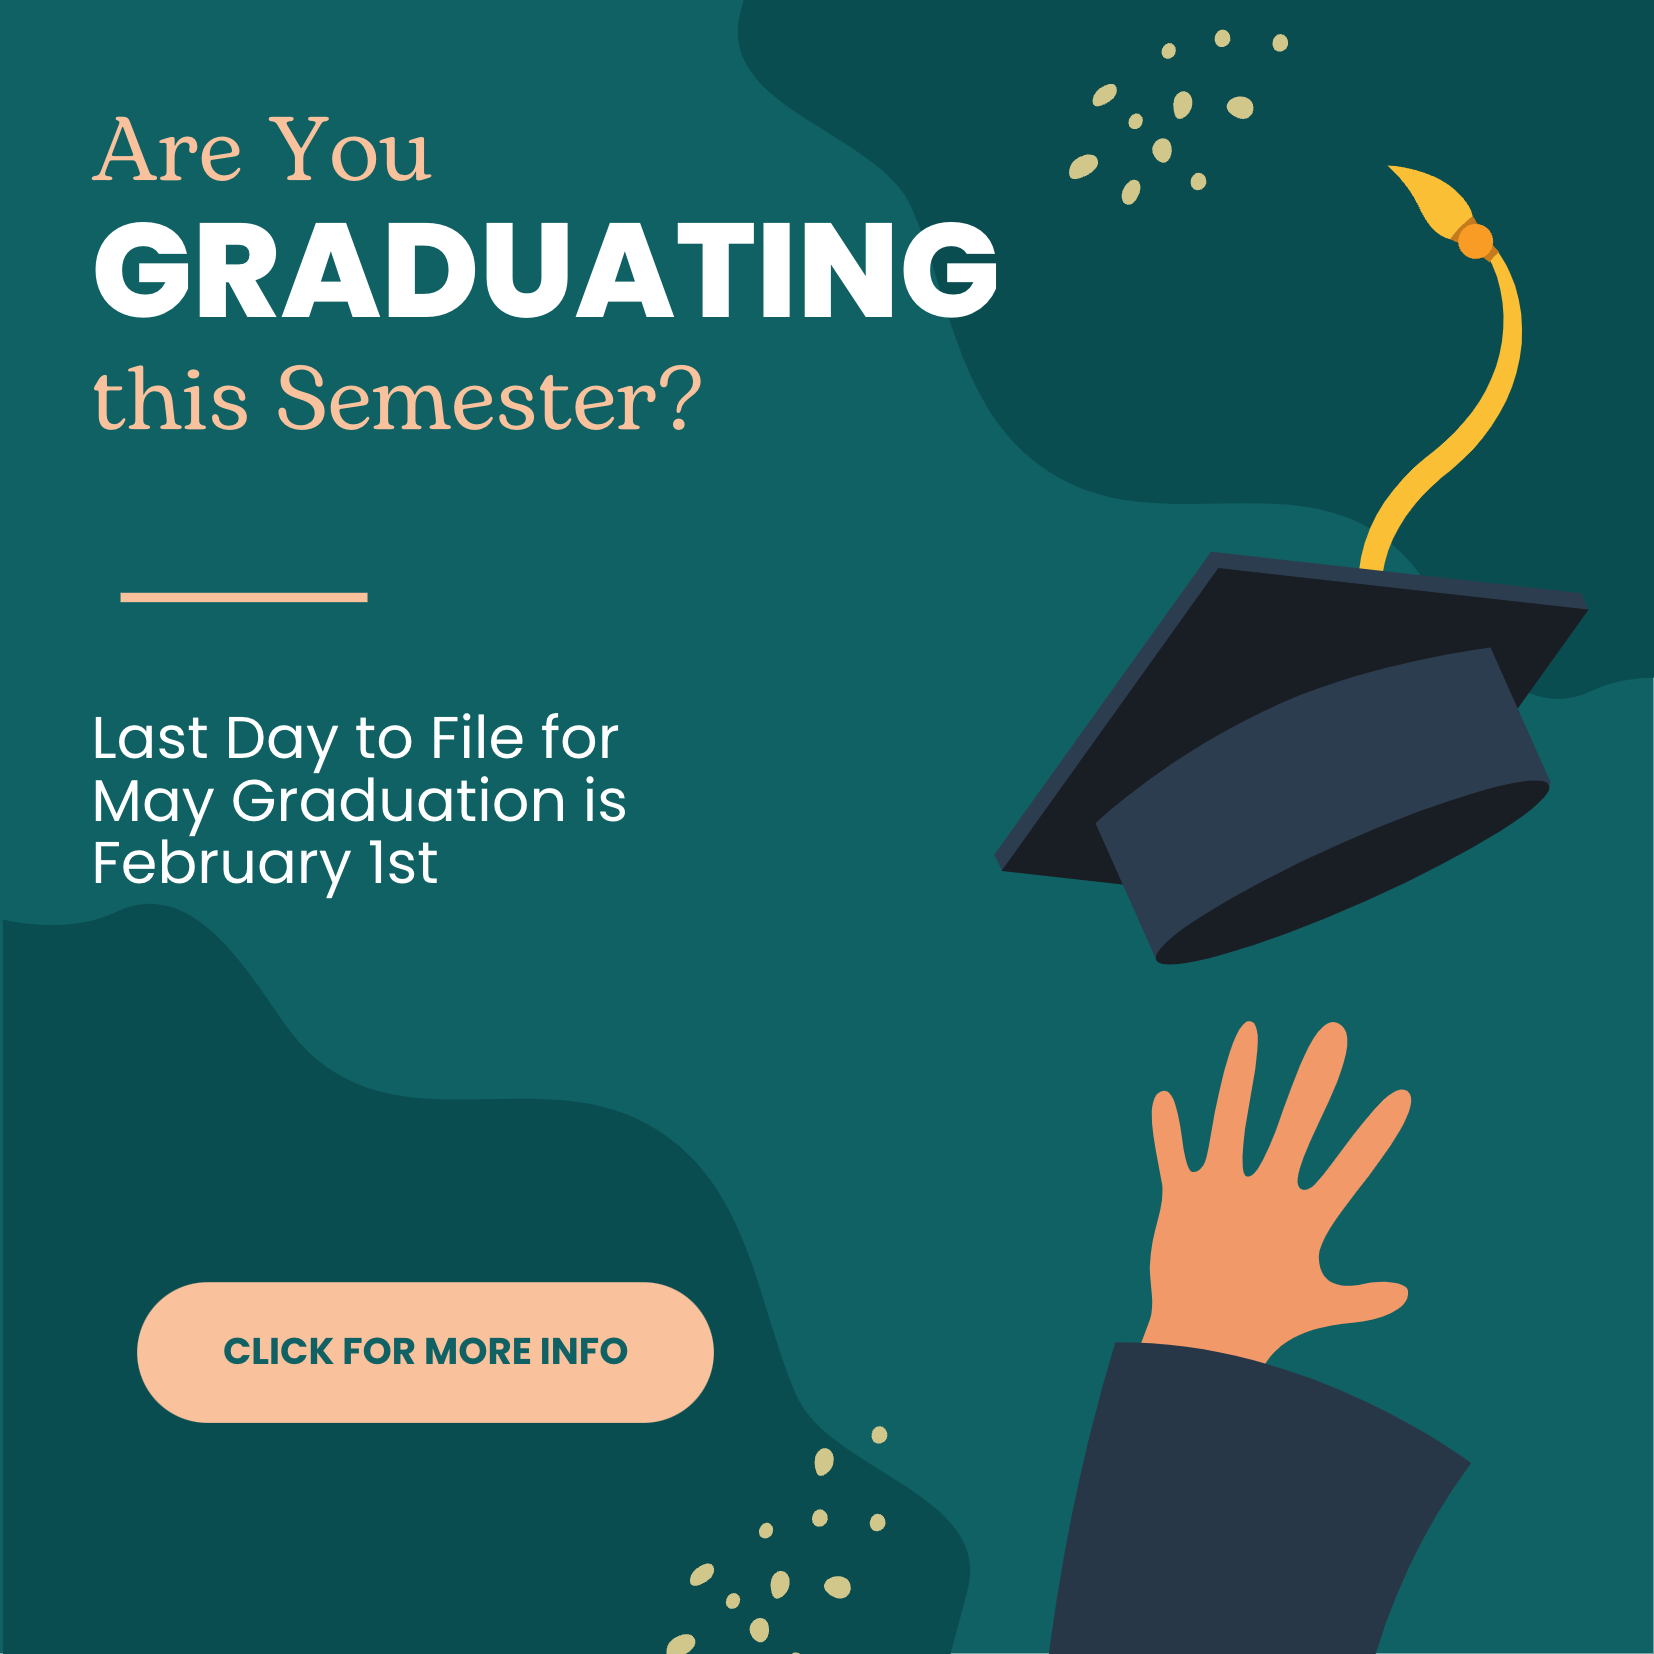 Are you graduating this semester? Last day to file for May graduation is February 1st. Click for more info.